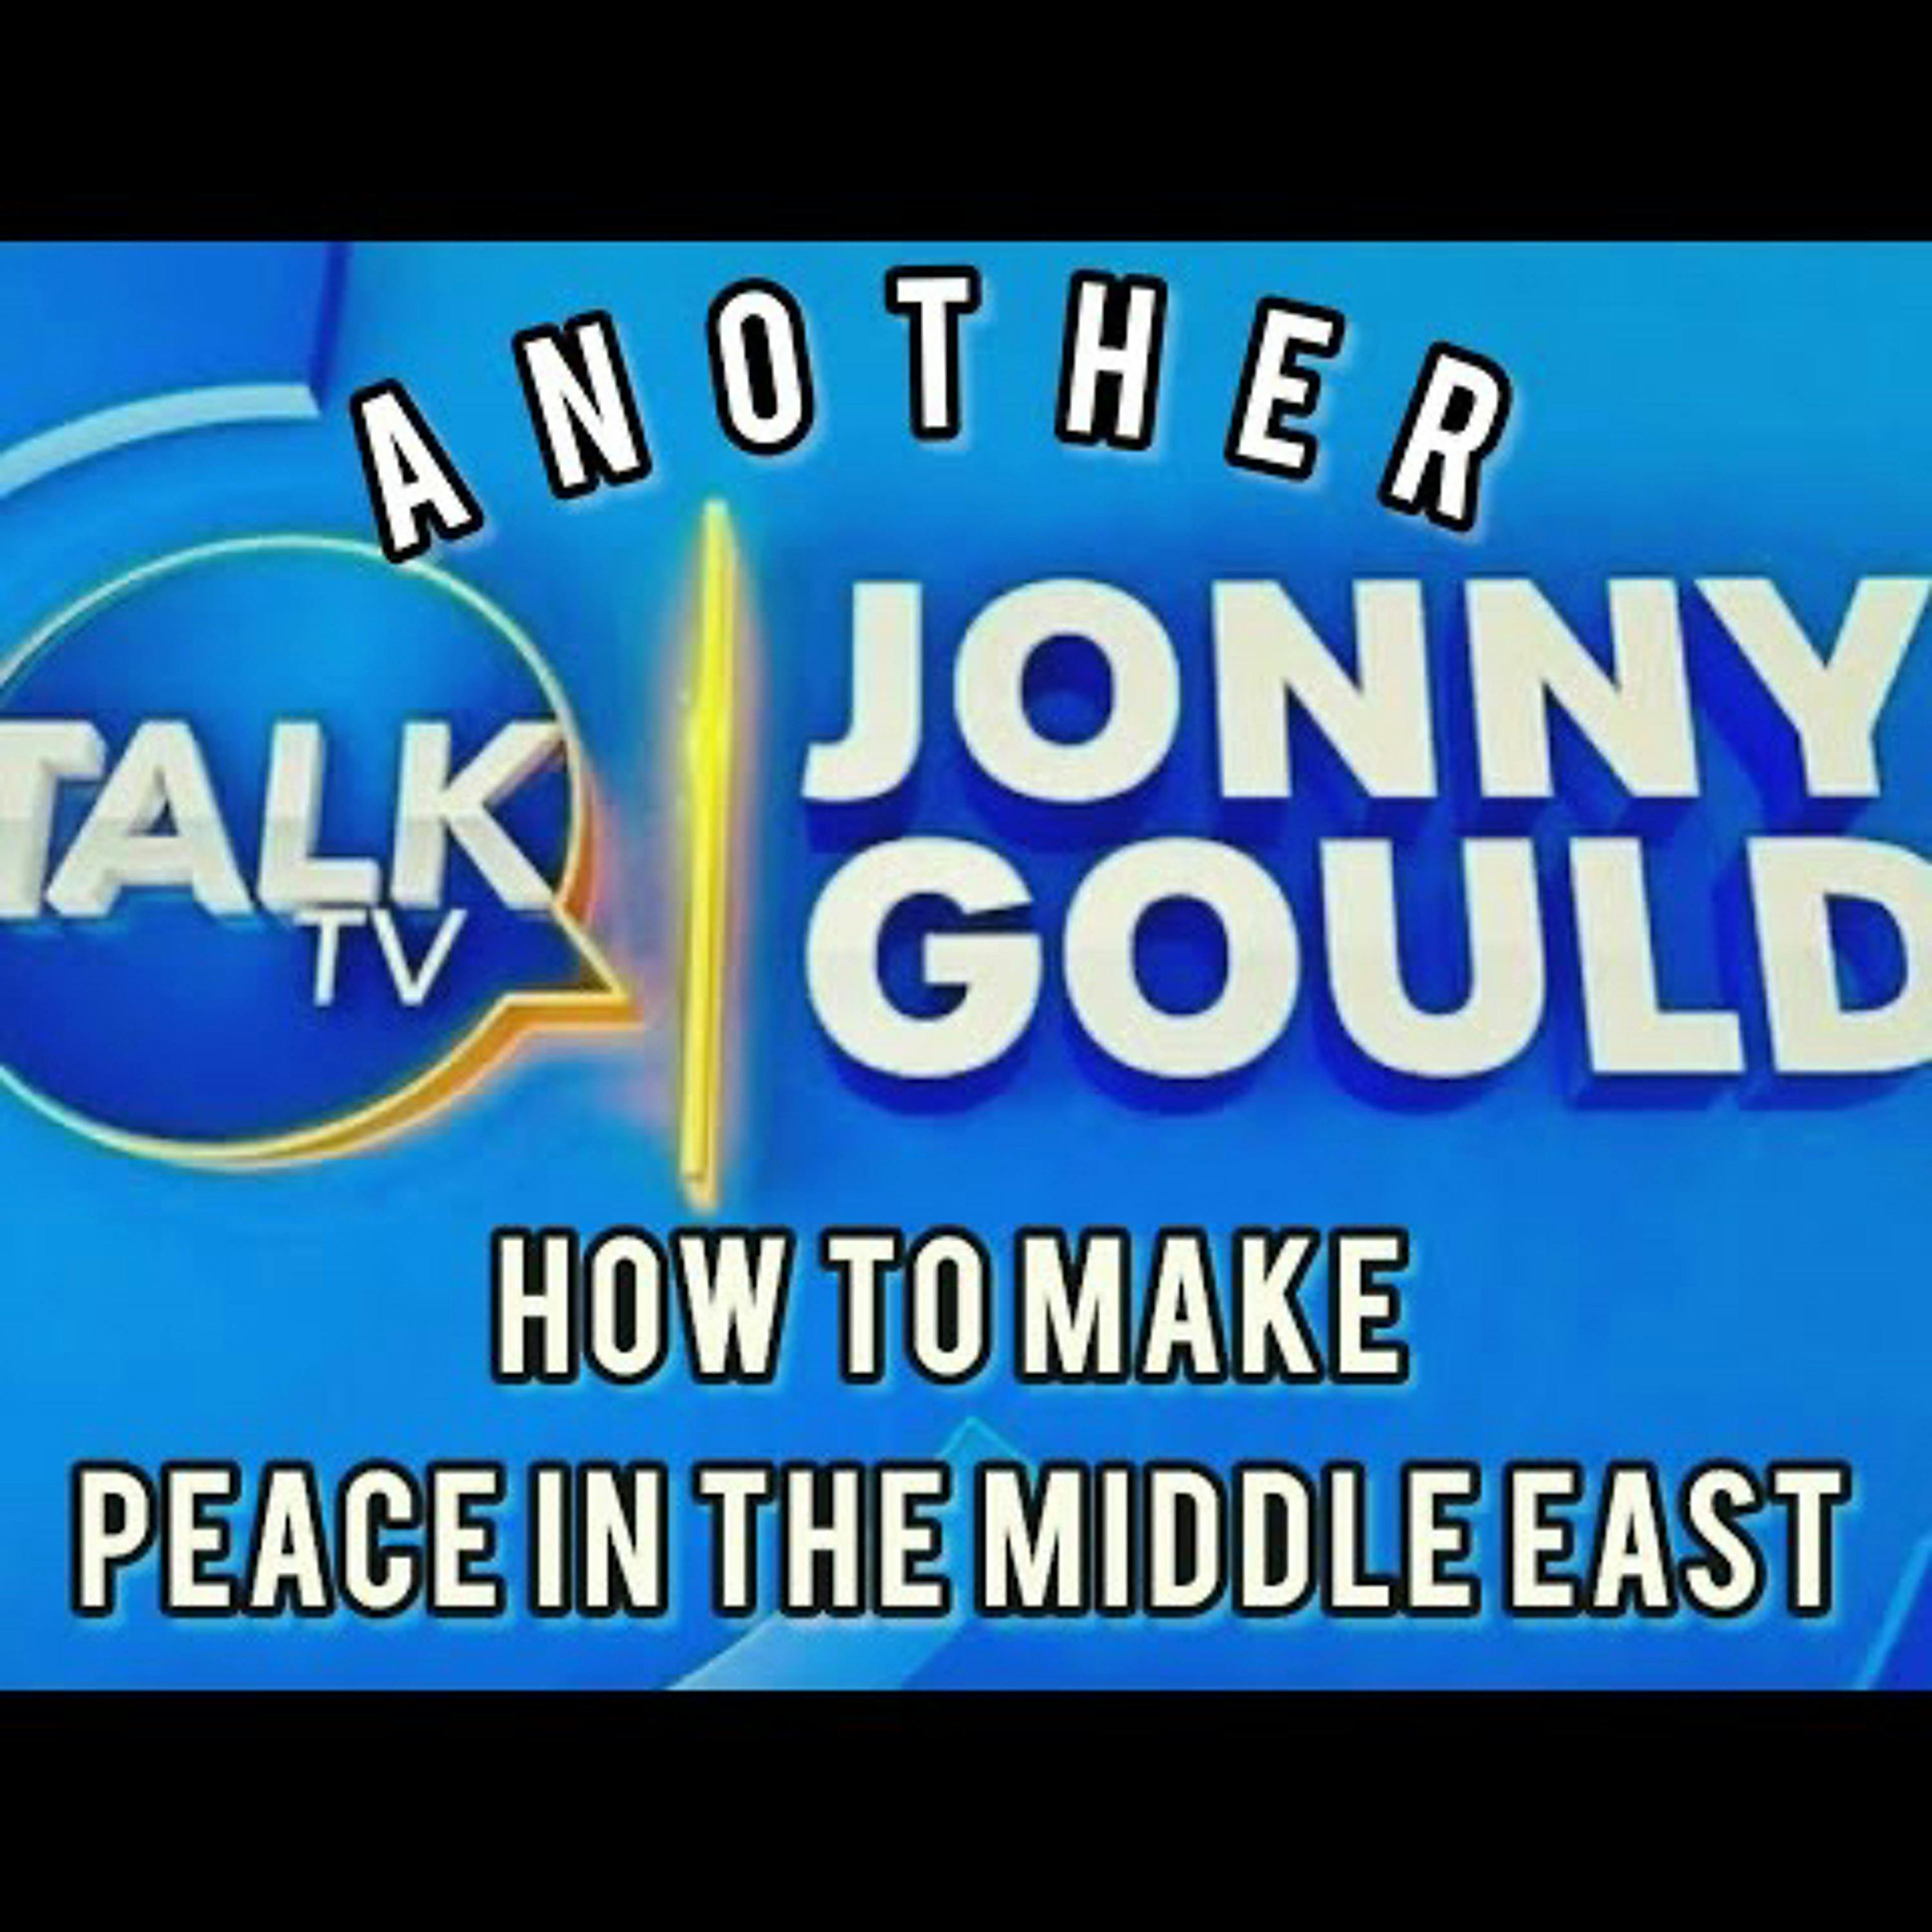 131: “Another How To Make Peace In The Middle East